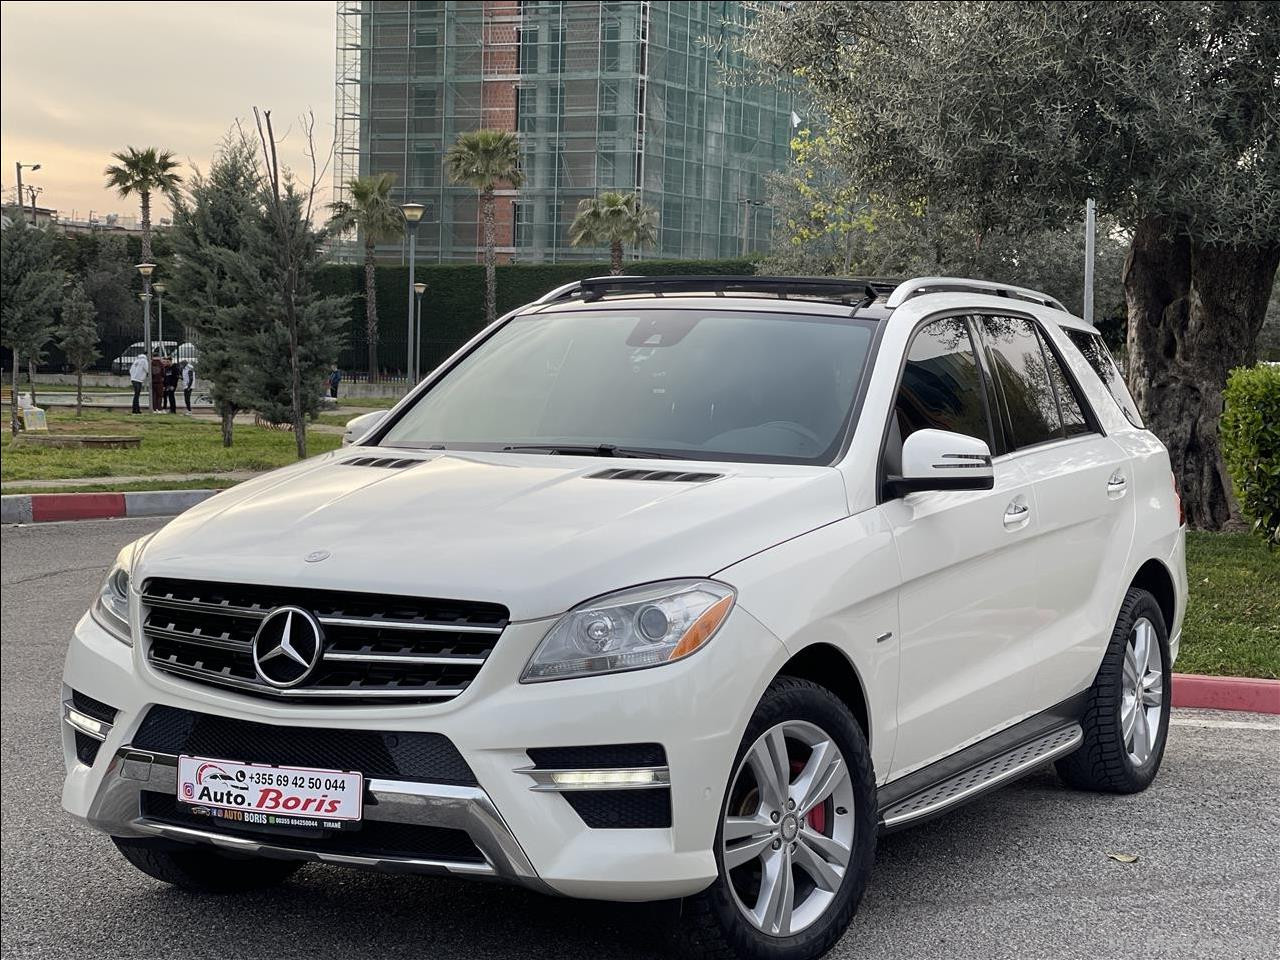 Mercedes Benz ML 350 Bluetec 2012 Amg Package Panorama